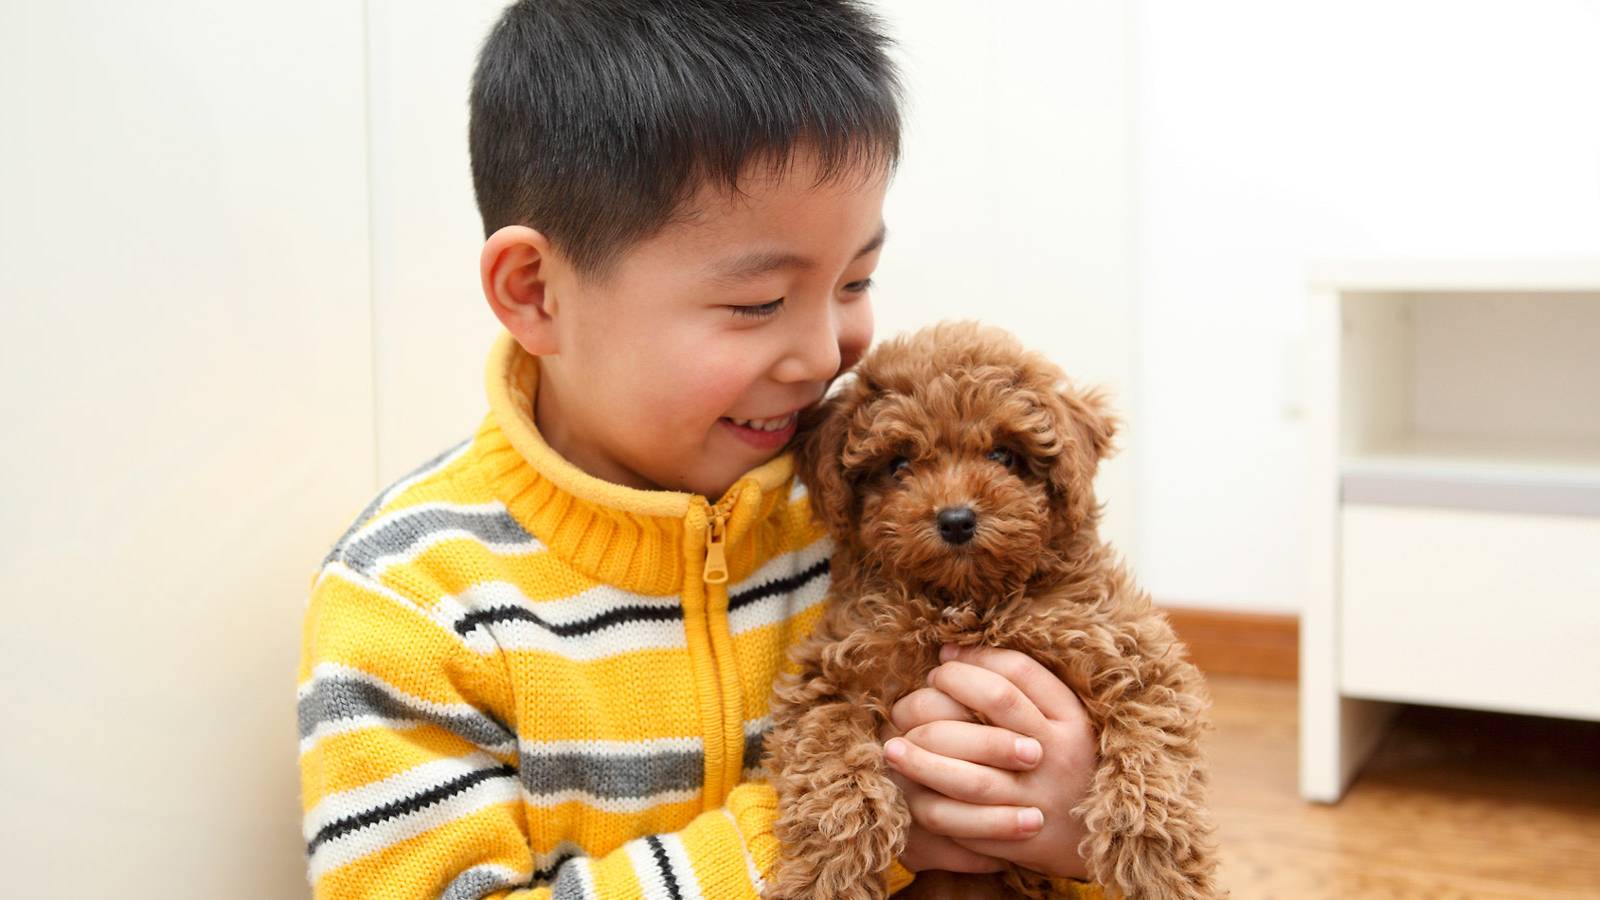 Kids--Getting-a-family-pet-6-facts-to-note